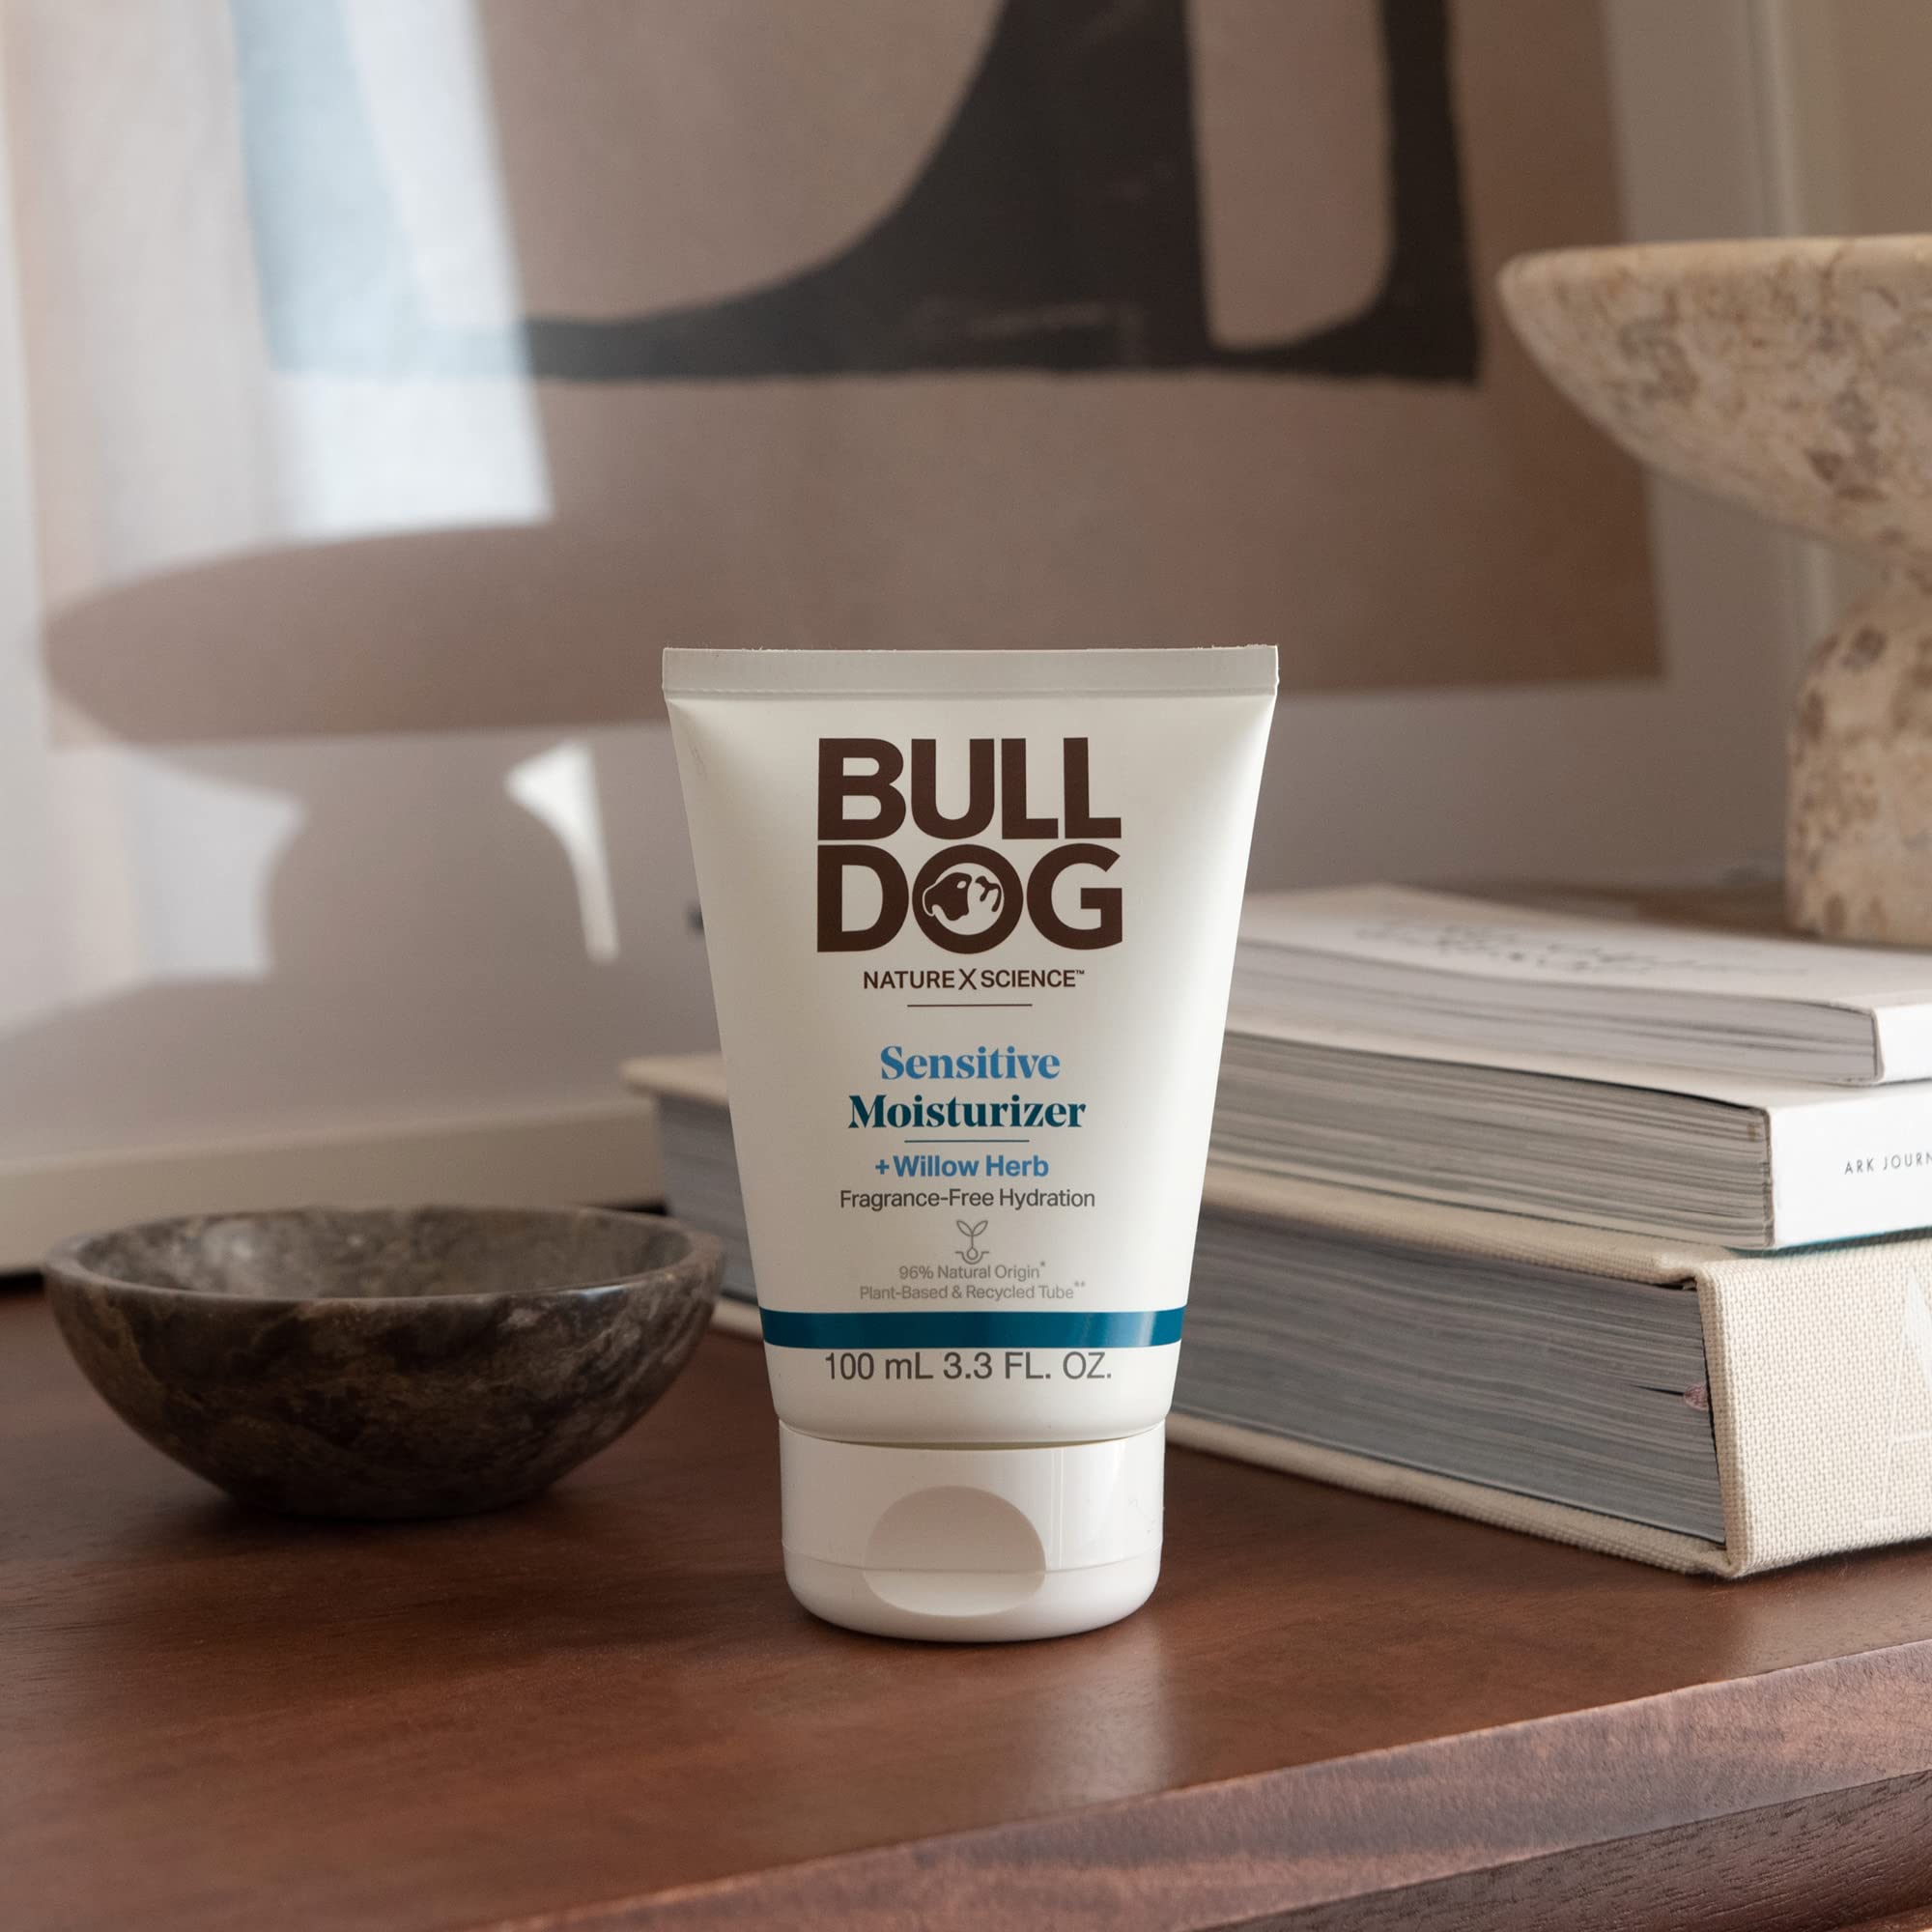 Bulldog Mens Skincare and Grooming Sensitive Full Face Kit with Moisturizer, Face Wash and Face Scrub, 3 Count